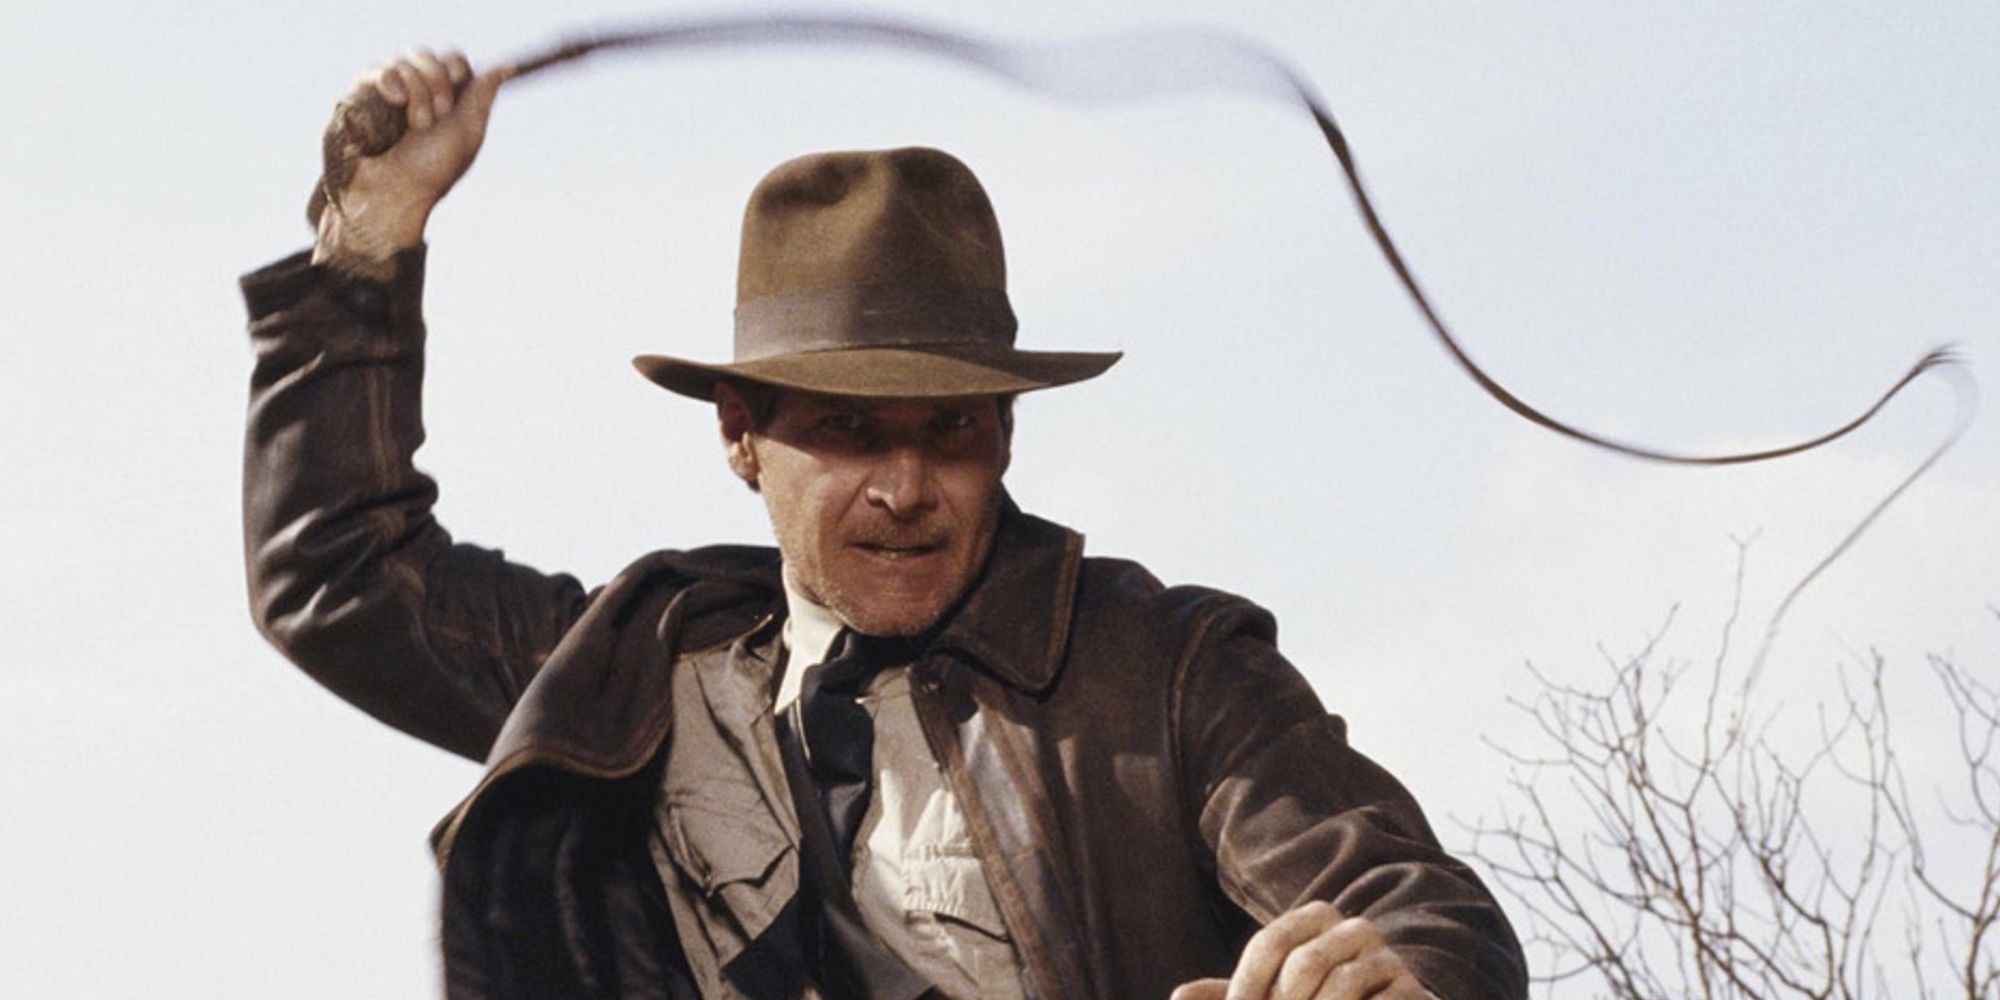 Indiana Jones and the Last Crusade Harrison Ford Using His Whip